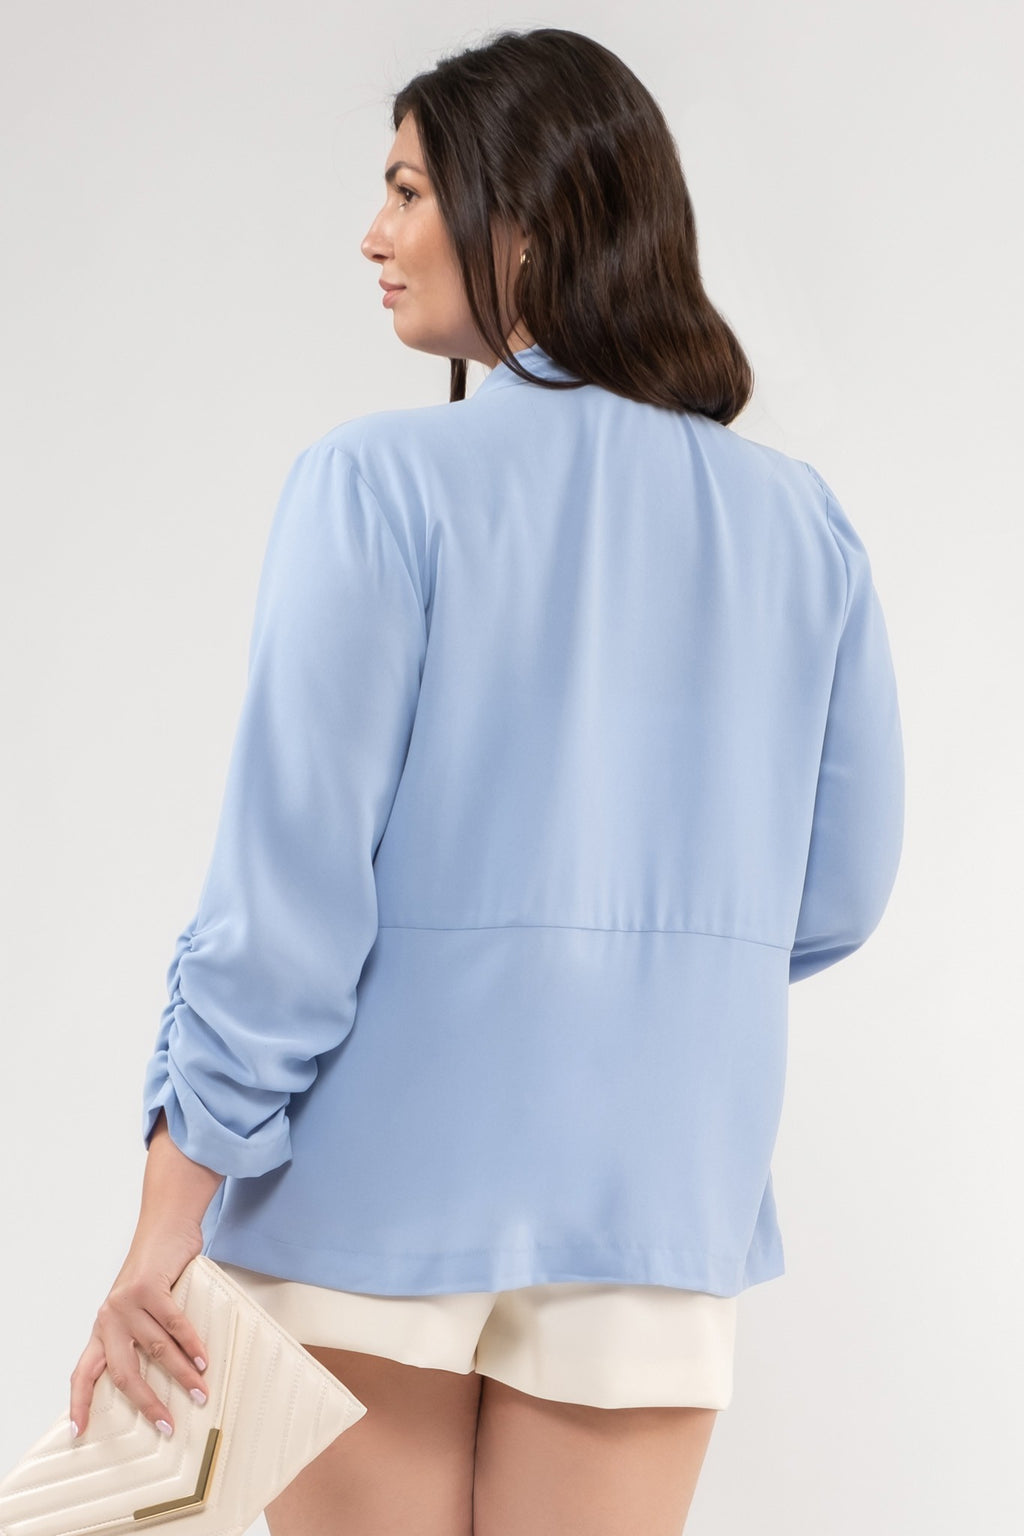 3/4 Ruched Sleeve Lightweight Blazer (Plus Size - Chambray)